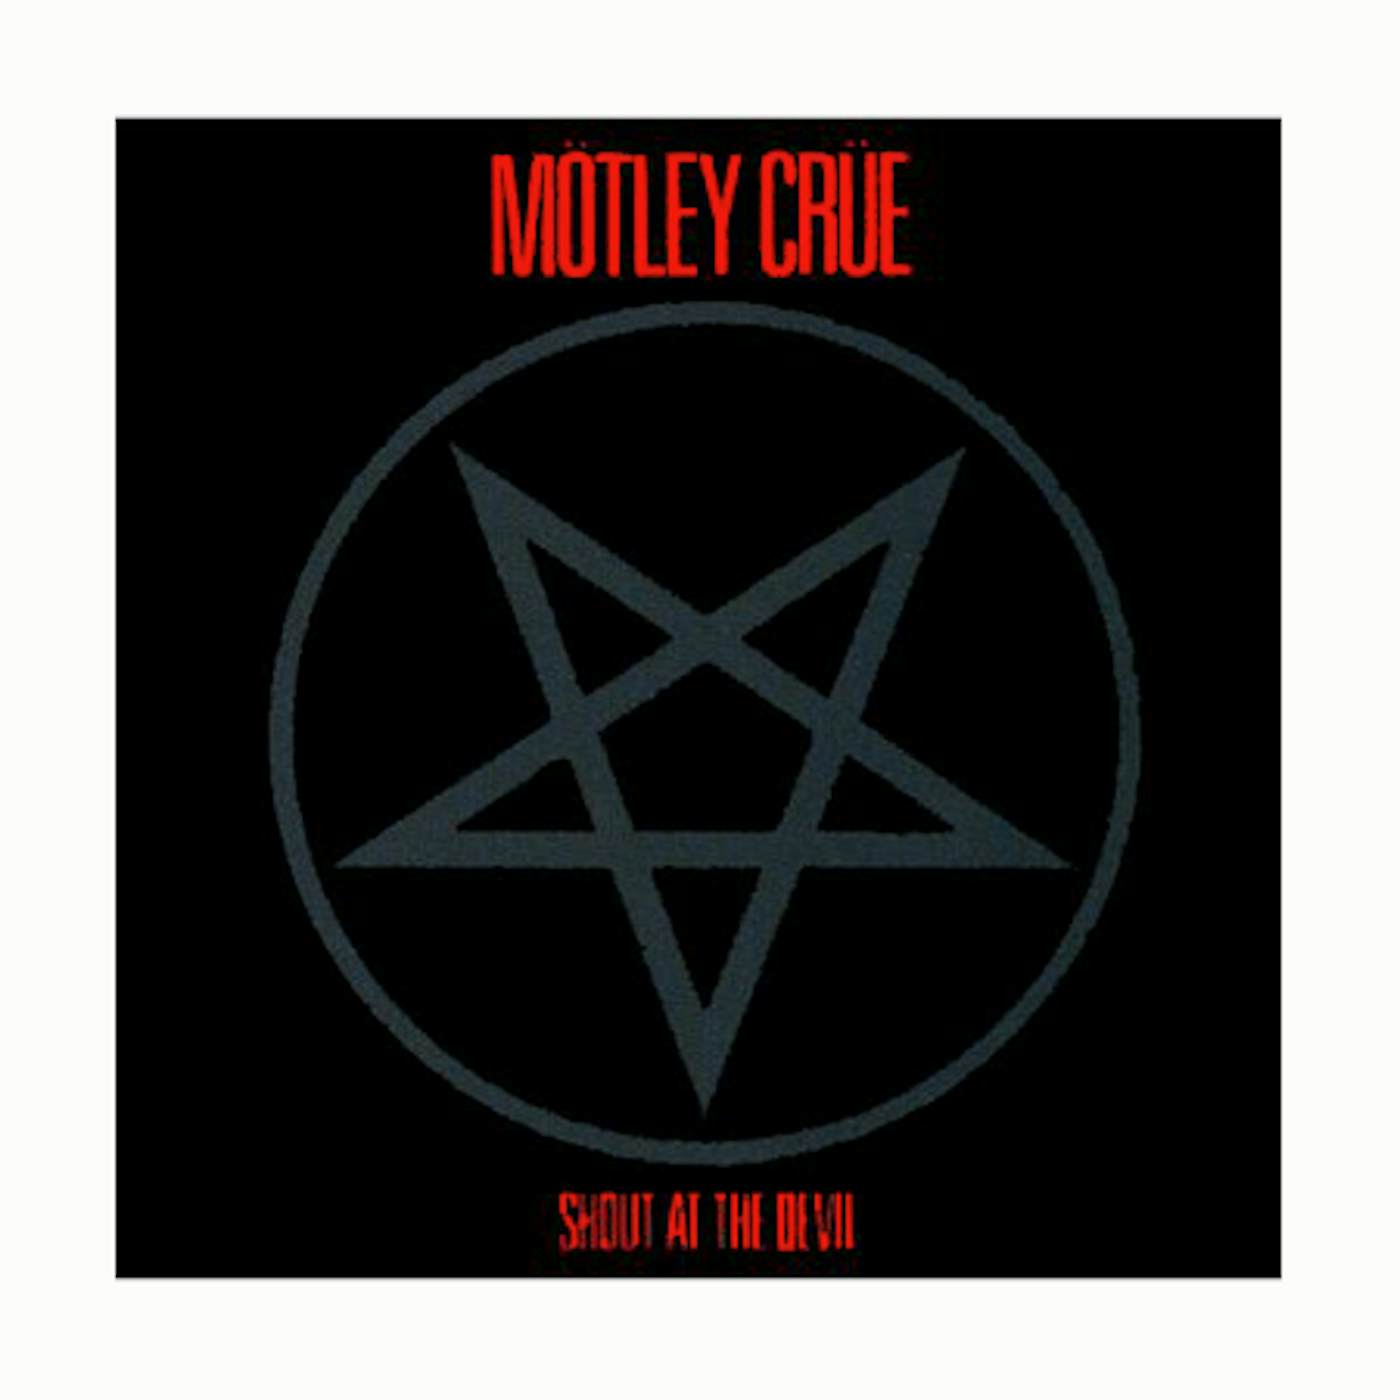 Mötley Crüe "Shout At The Devil" Stickers & Decals